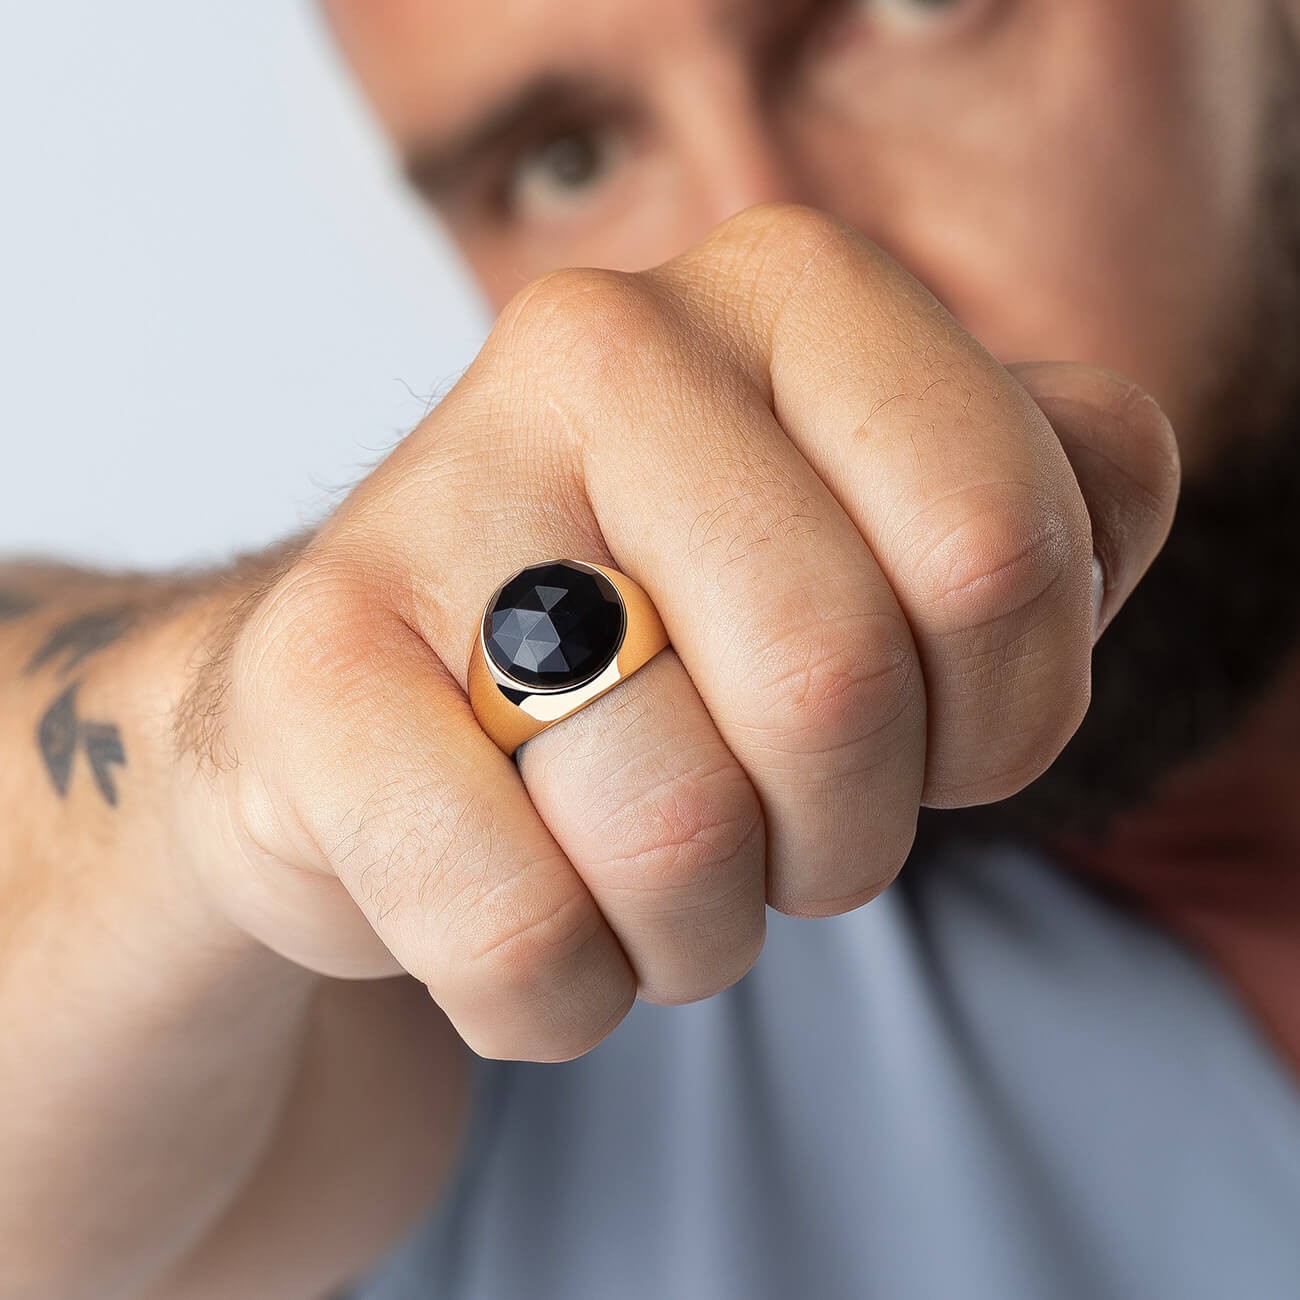 Male signet ring with black crystal